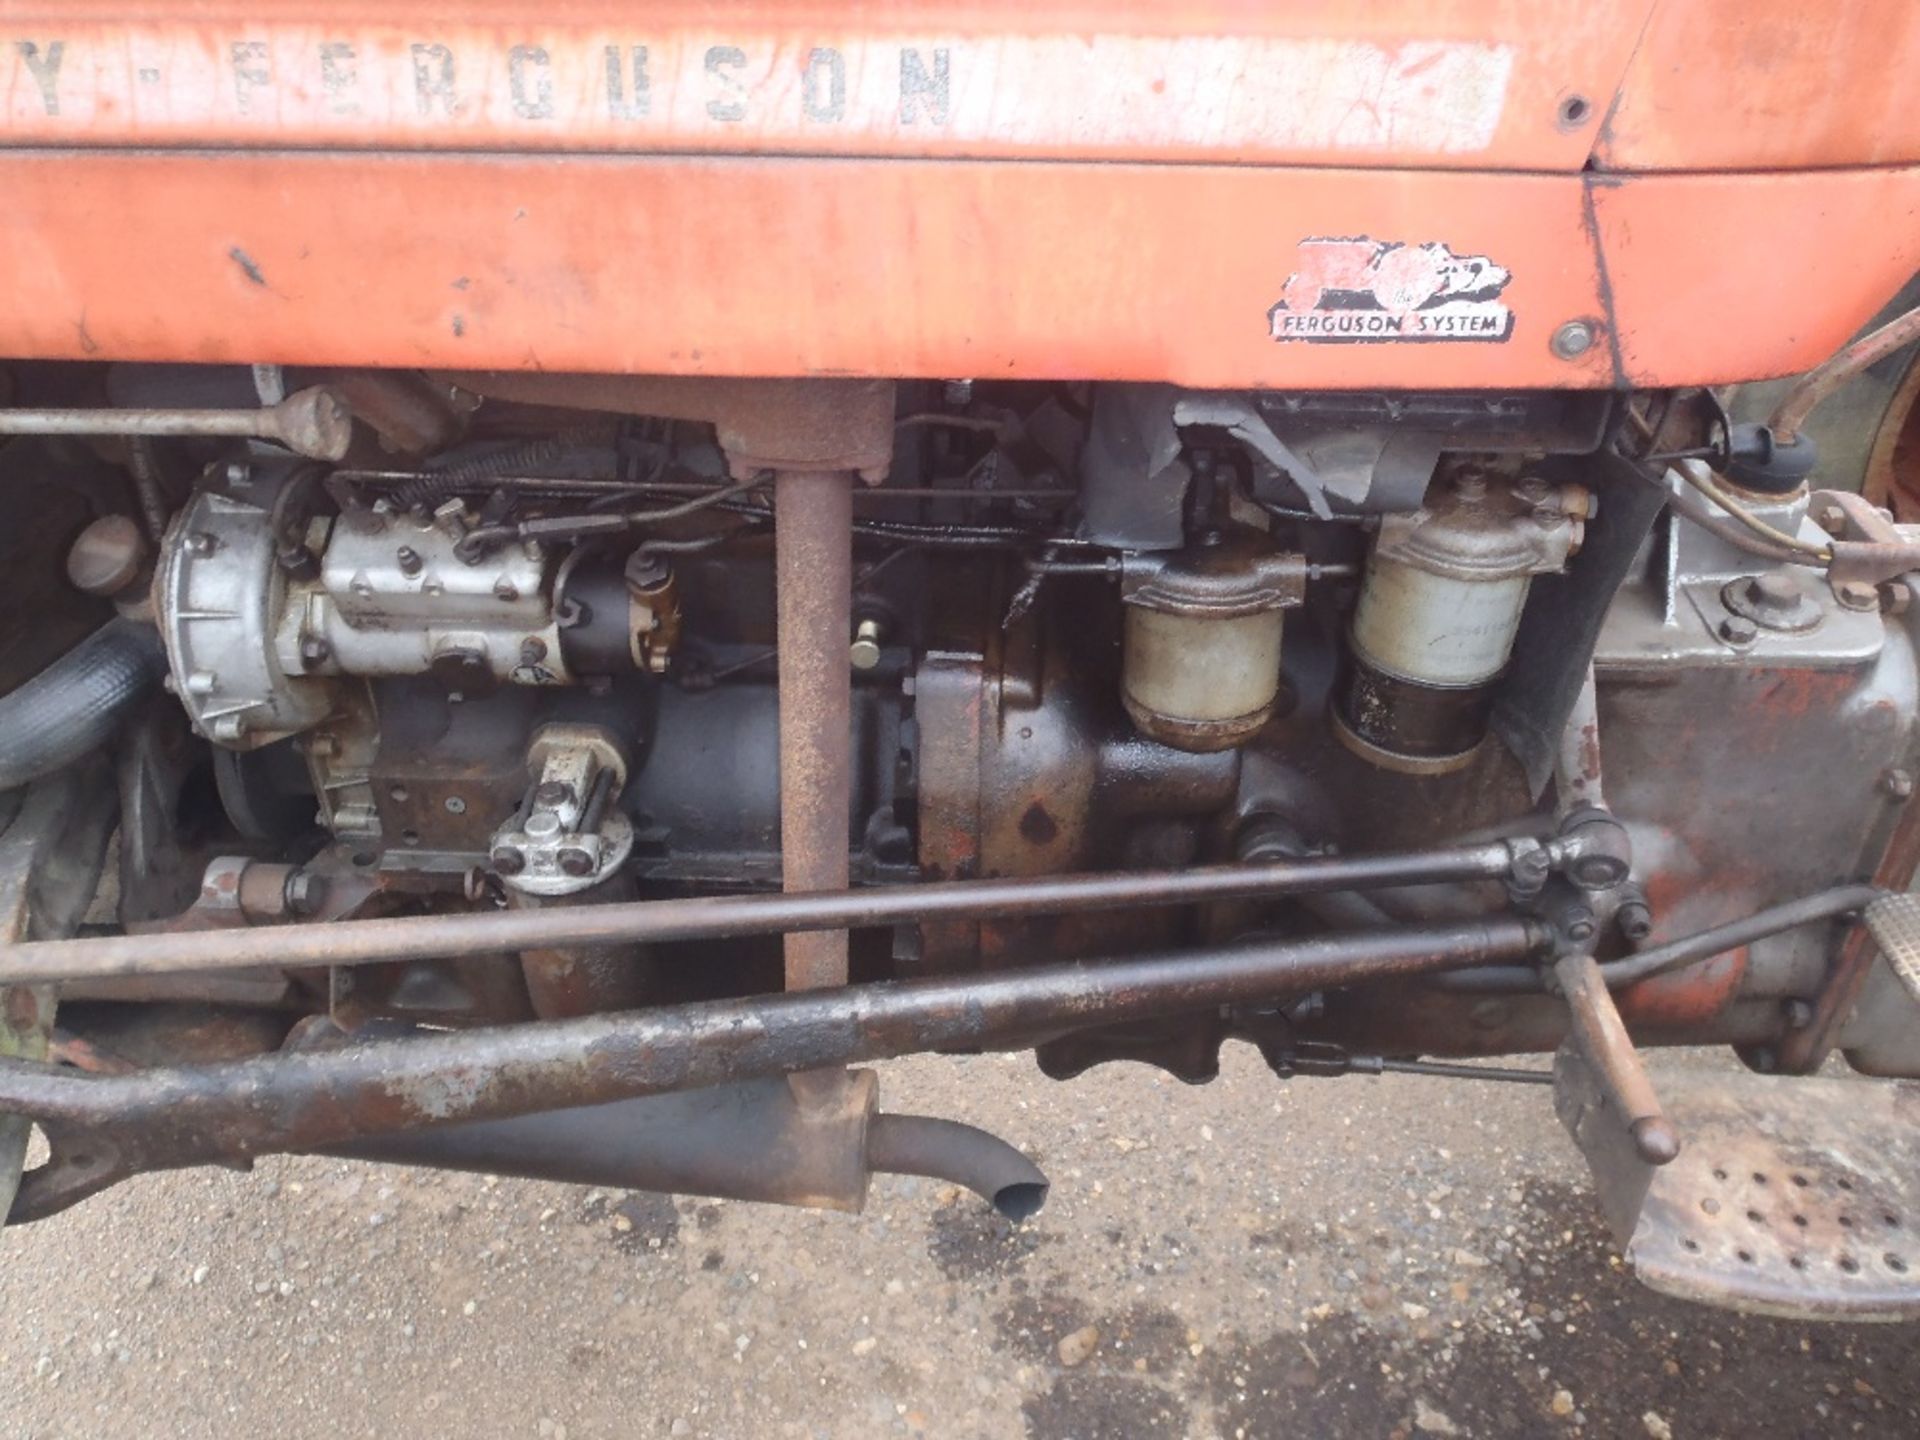 Massey Ferguson 145 2wd Tractor with Perkins 3cyl Engine - Image 5 of 9